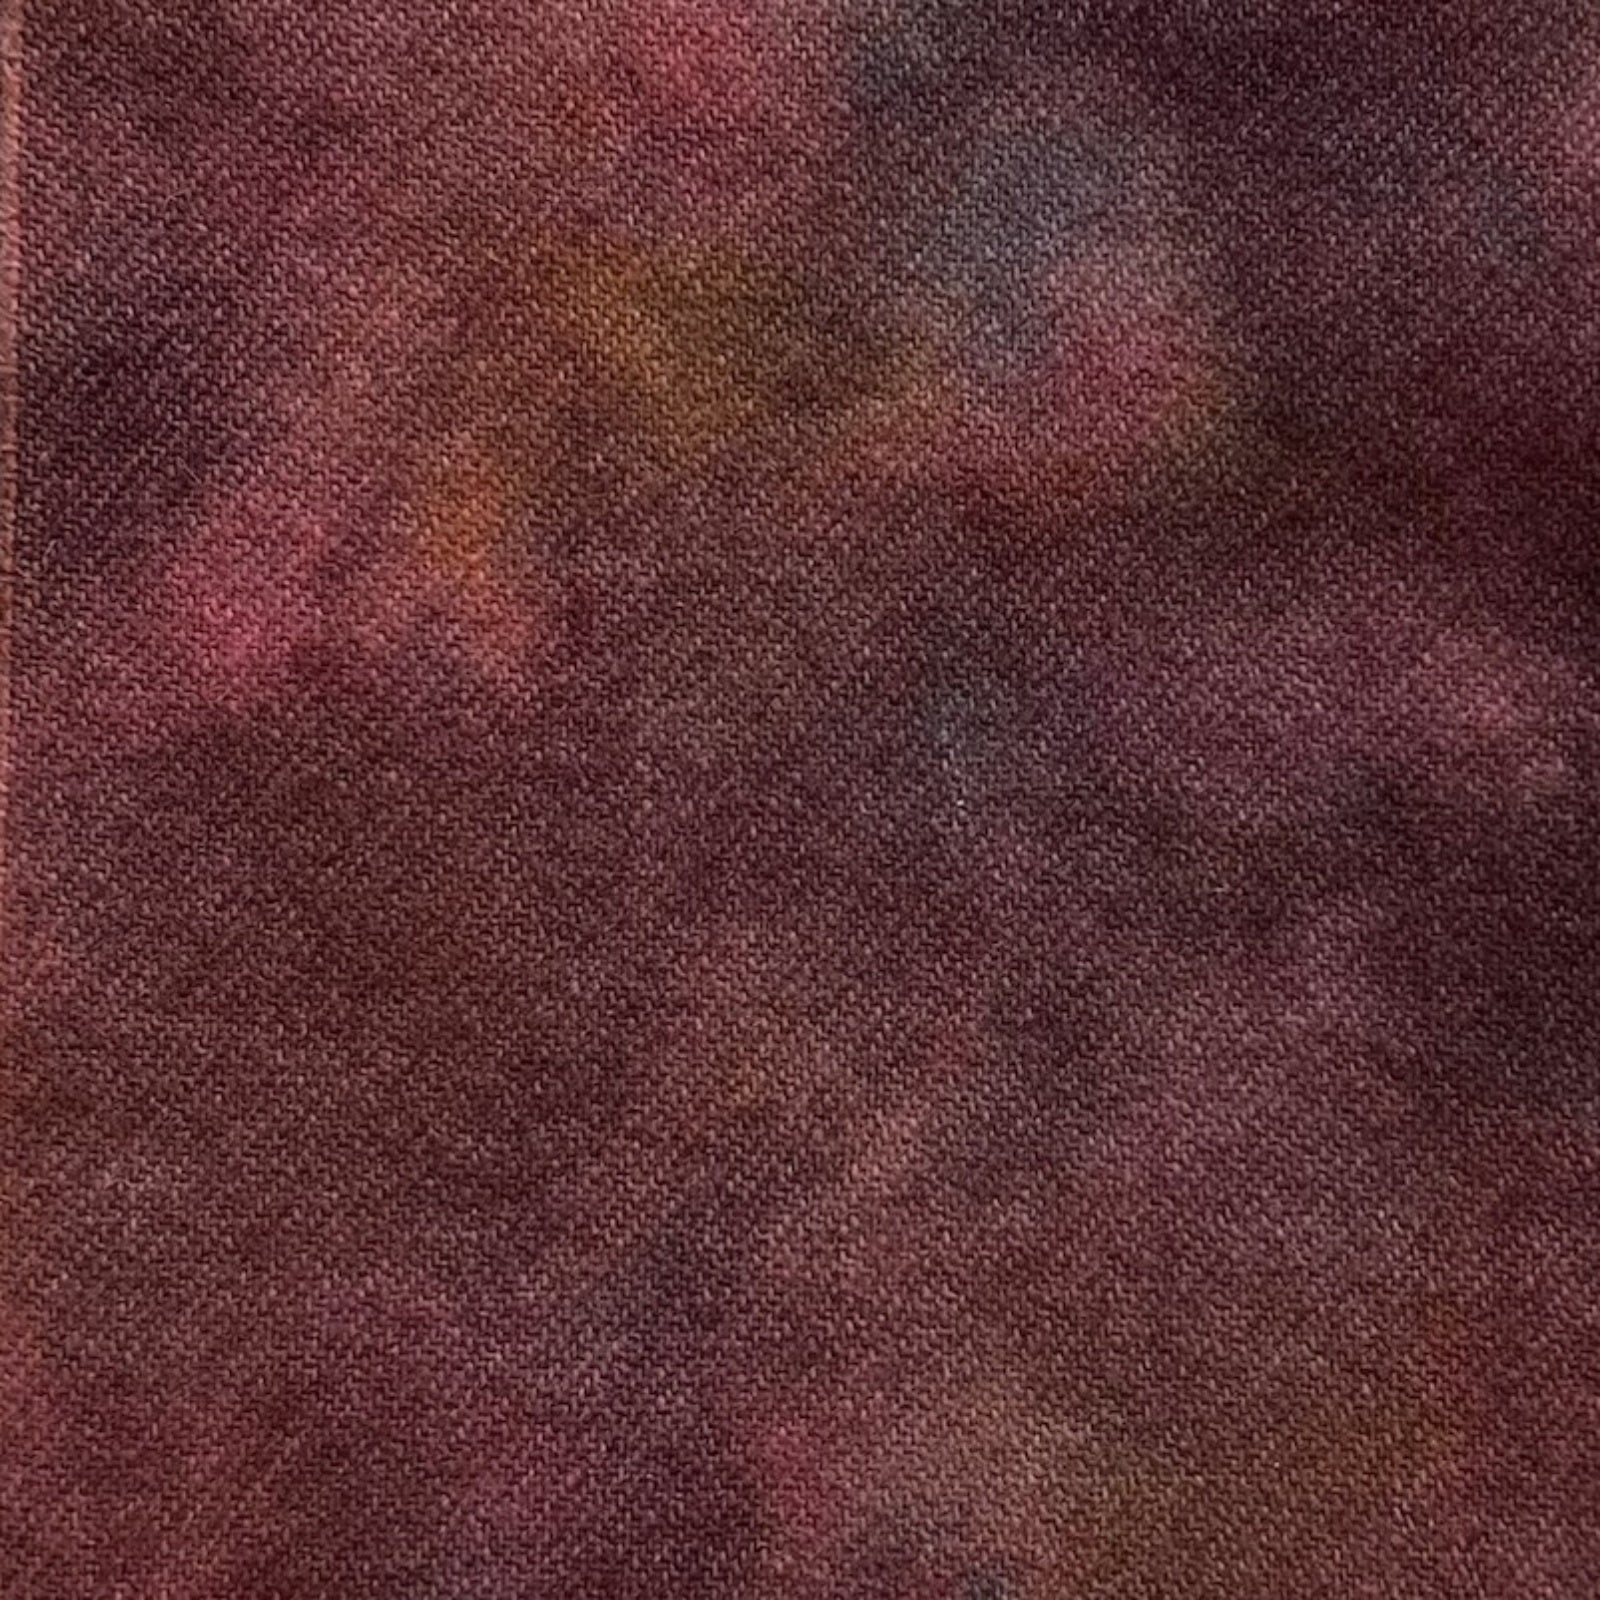 Muscatel - Colorama Hand Dyed Wool - Offered by HoneyBee Hive Rug Hooking